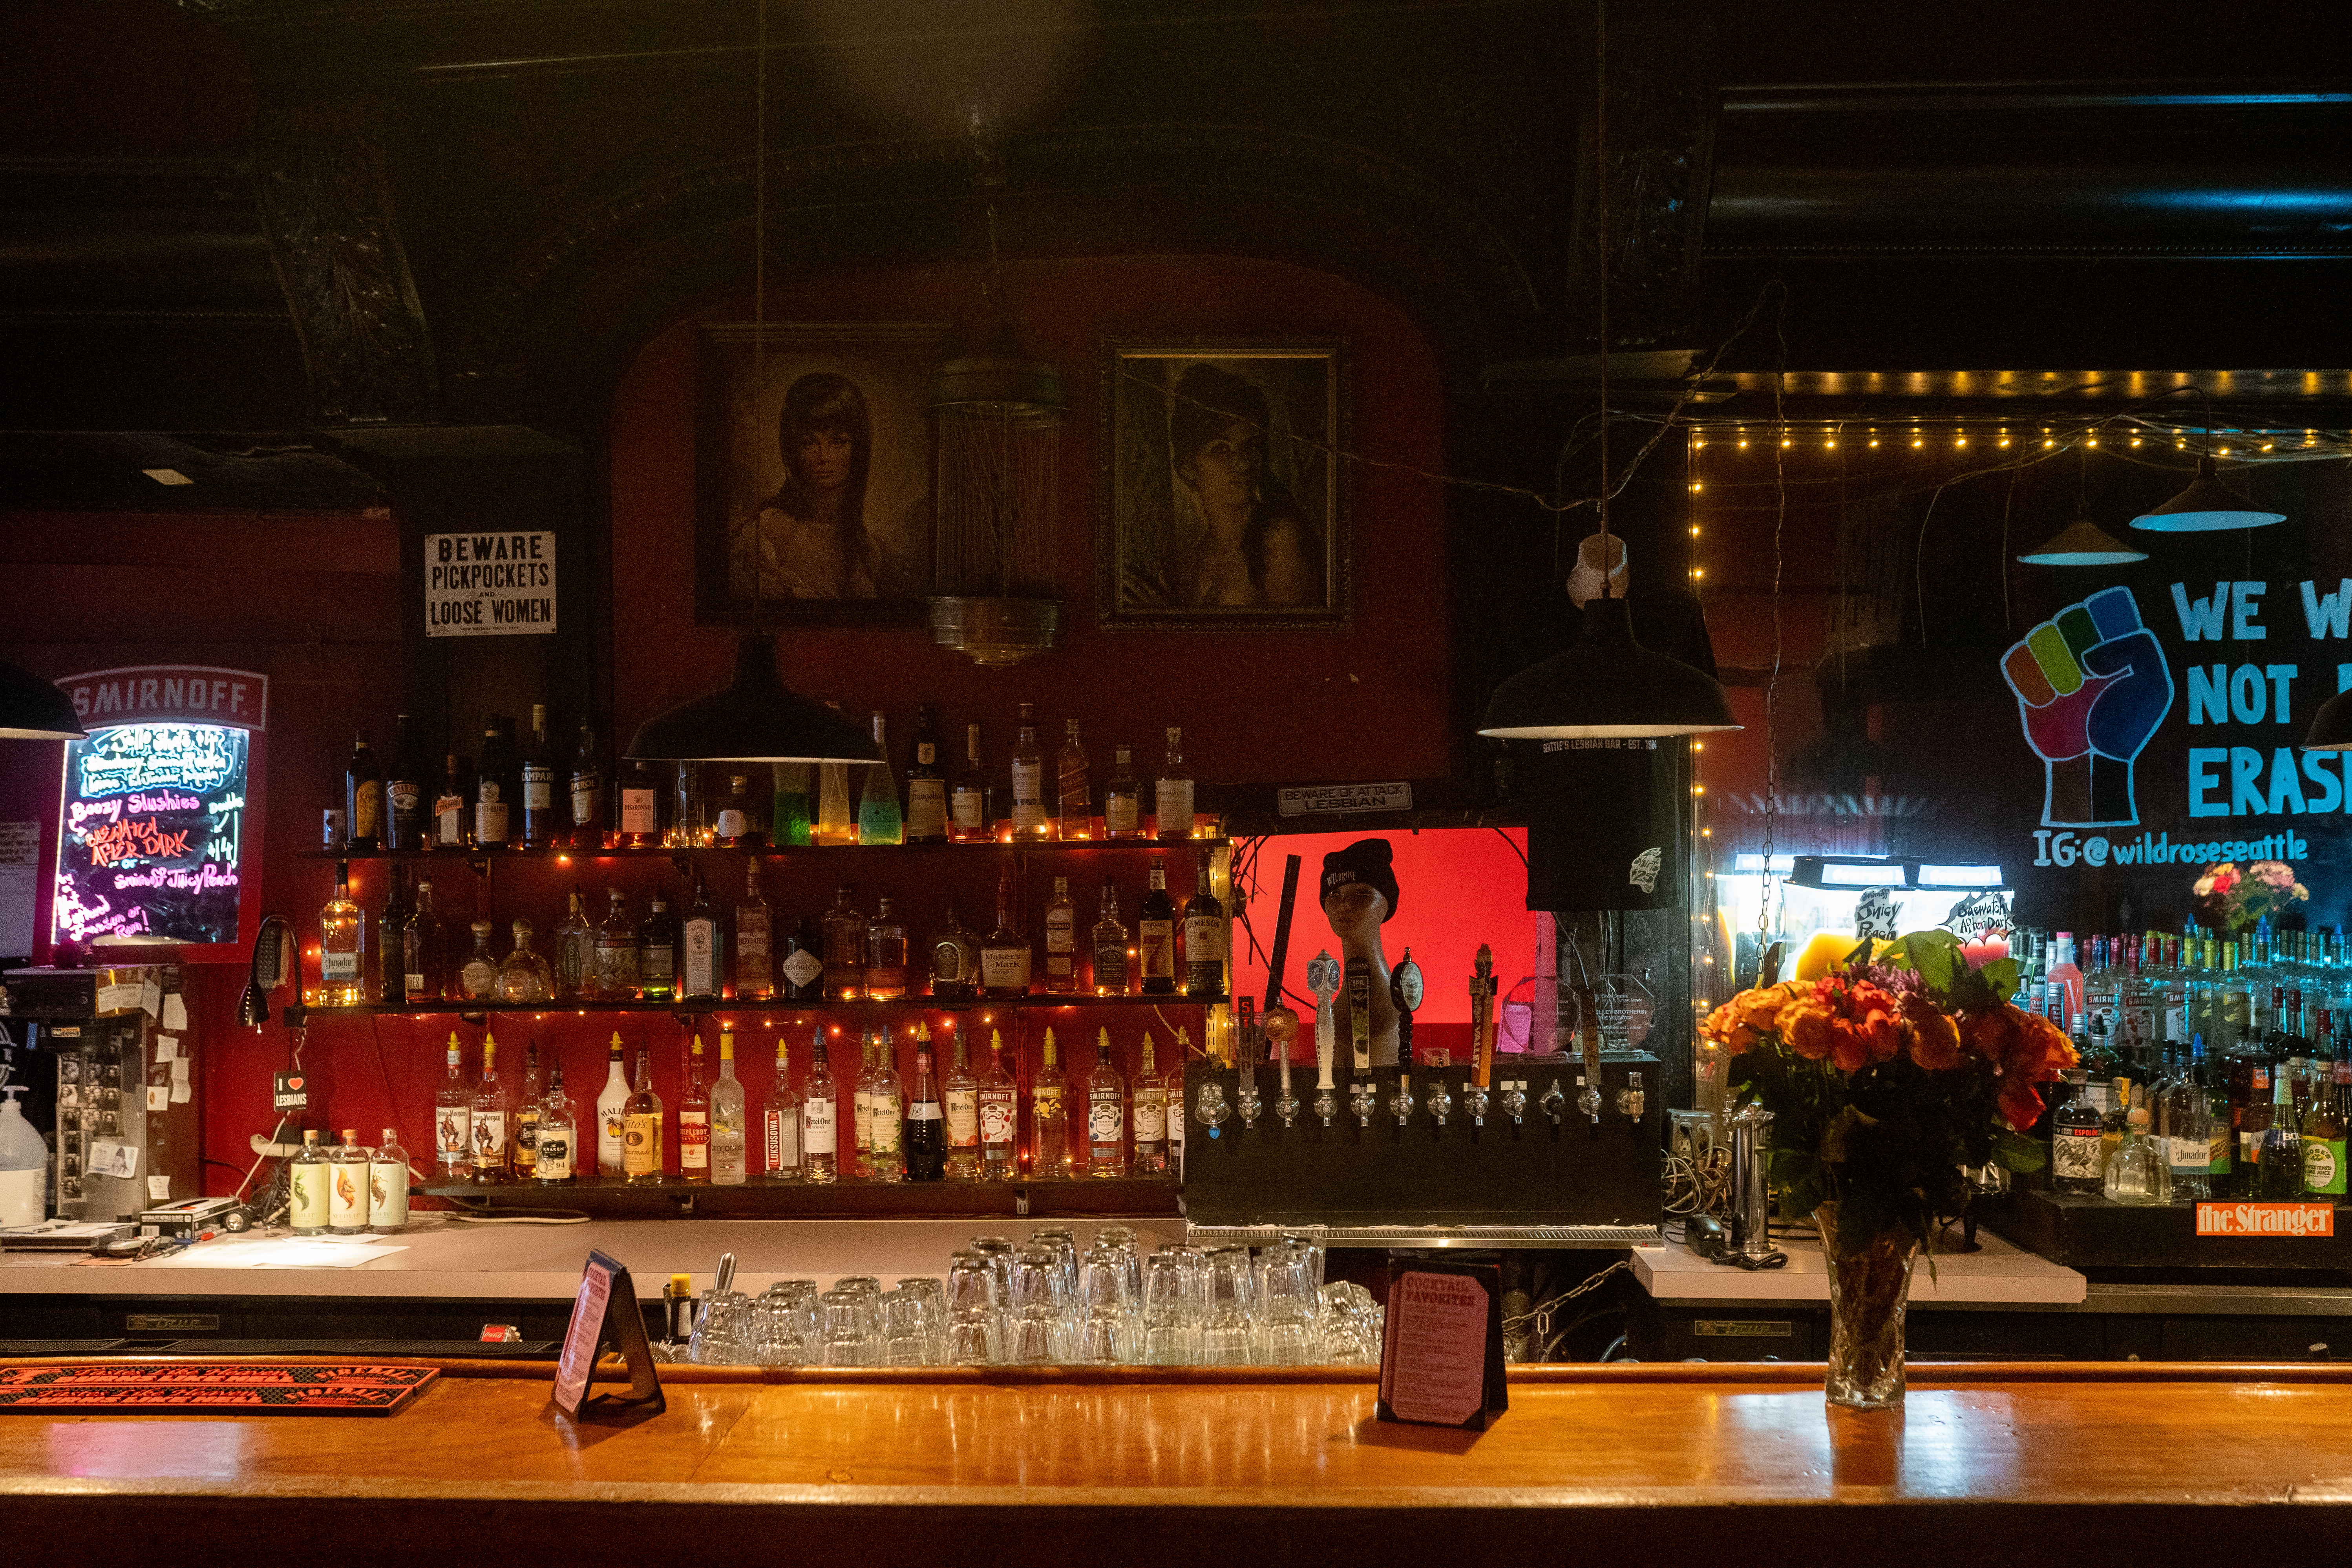 A bar with bottles on racks behind it and signs reading “Beware: pickpockets and loose women” and a sign with a raised rainbow-colored fist with the words “we will not be erased.”